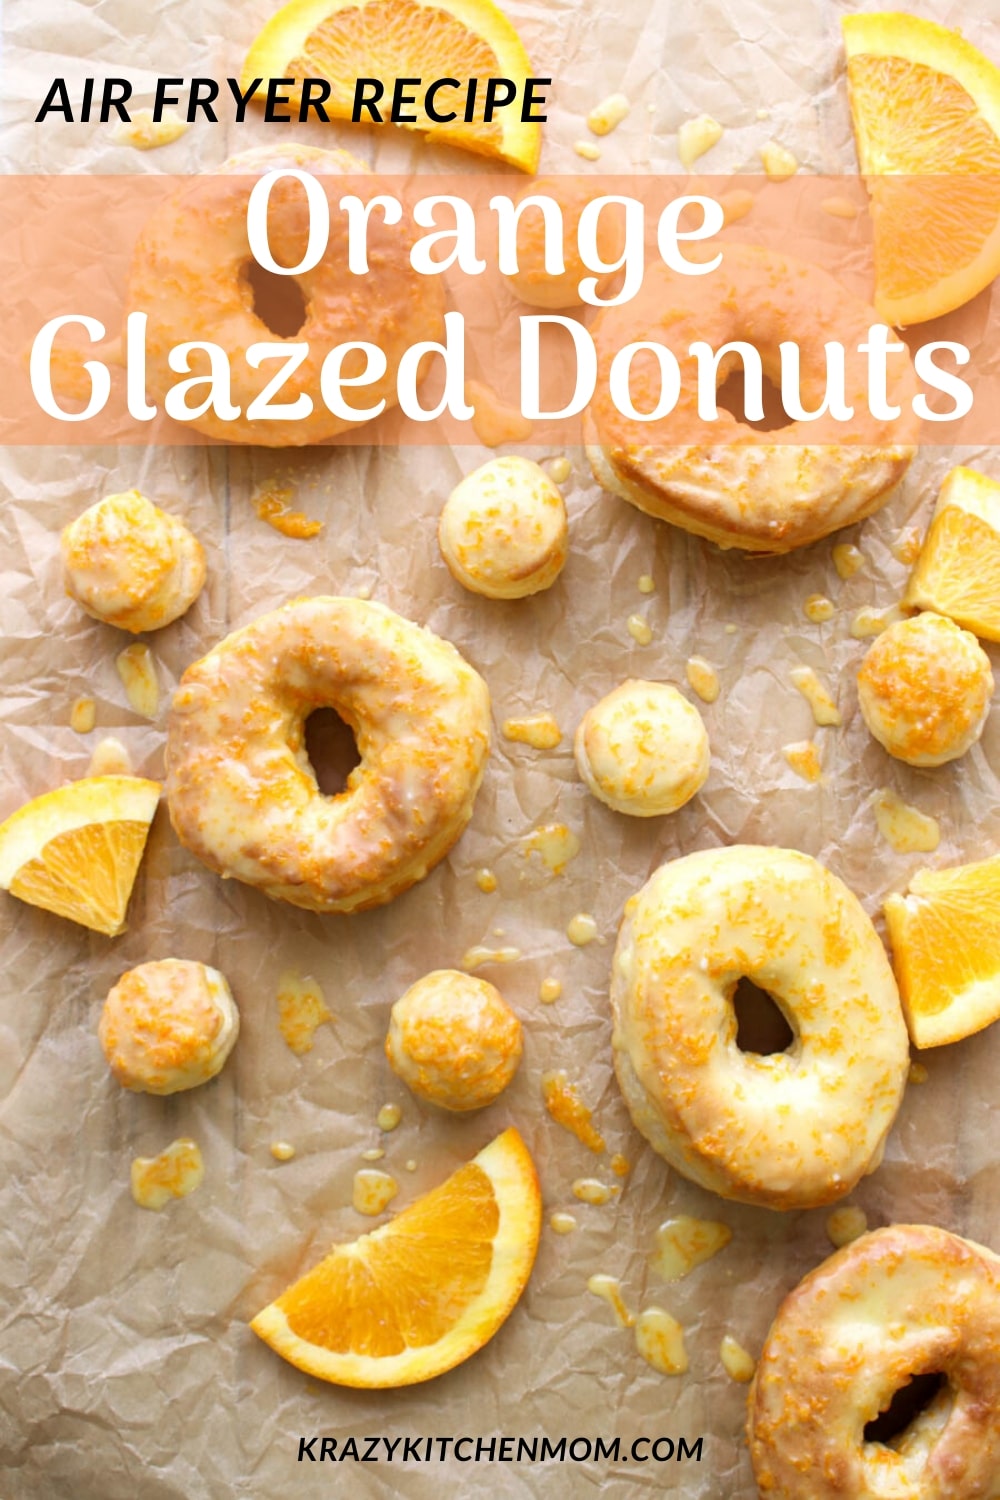 Air Fryer Donuts are made with refrigerated biscuit dough, confectioners sugar, and fresh orange juice. Easy, fast and delicious. via @krazykitchenmom